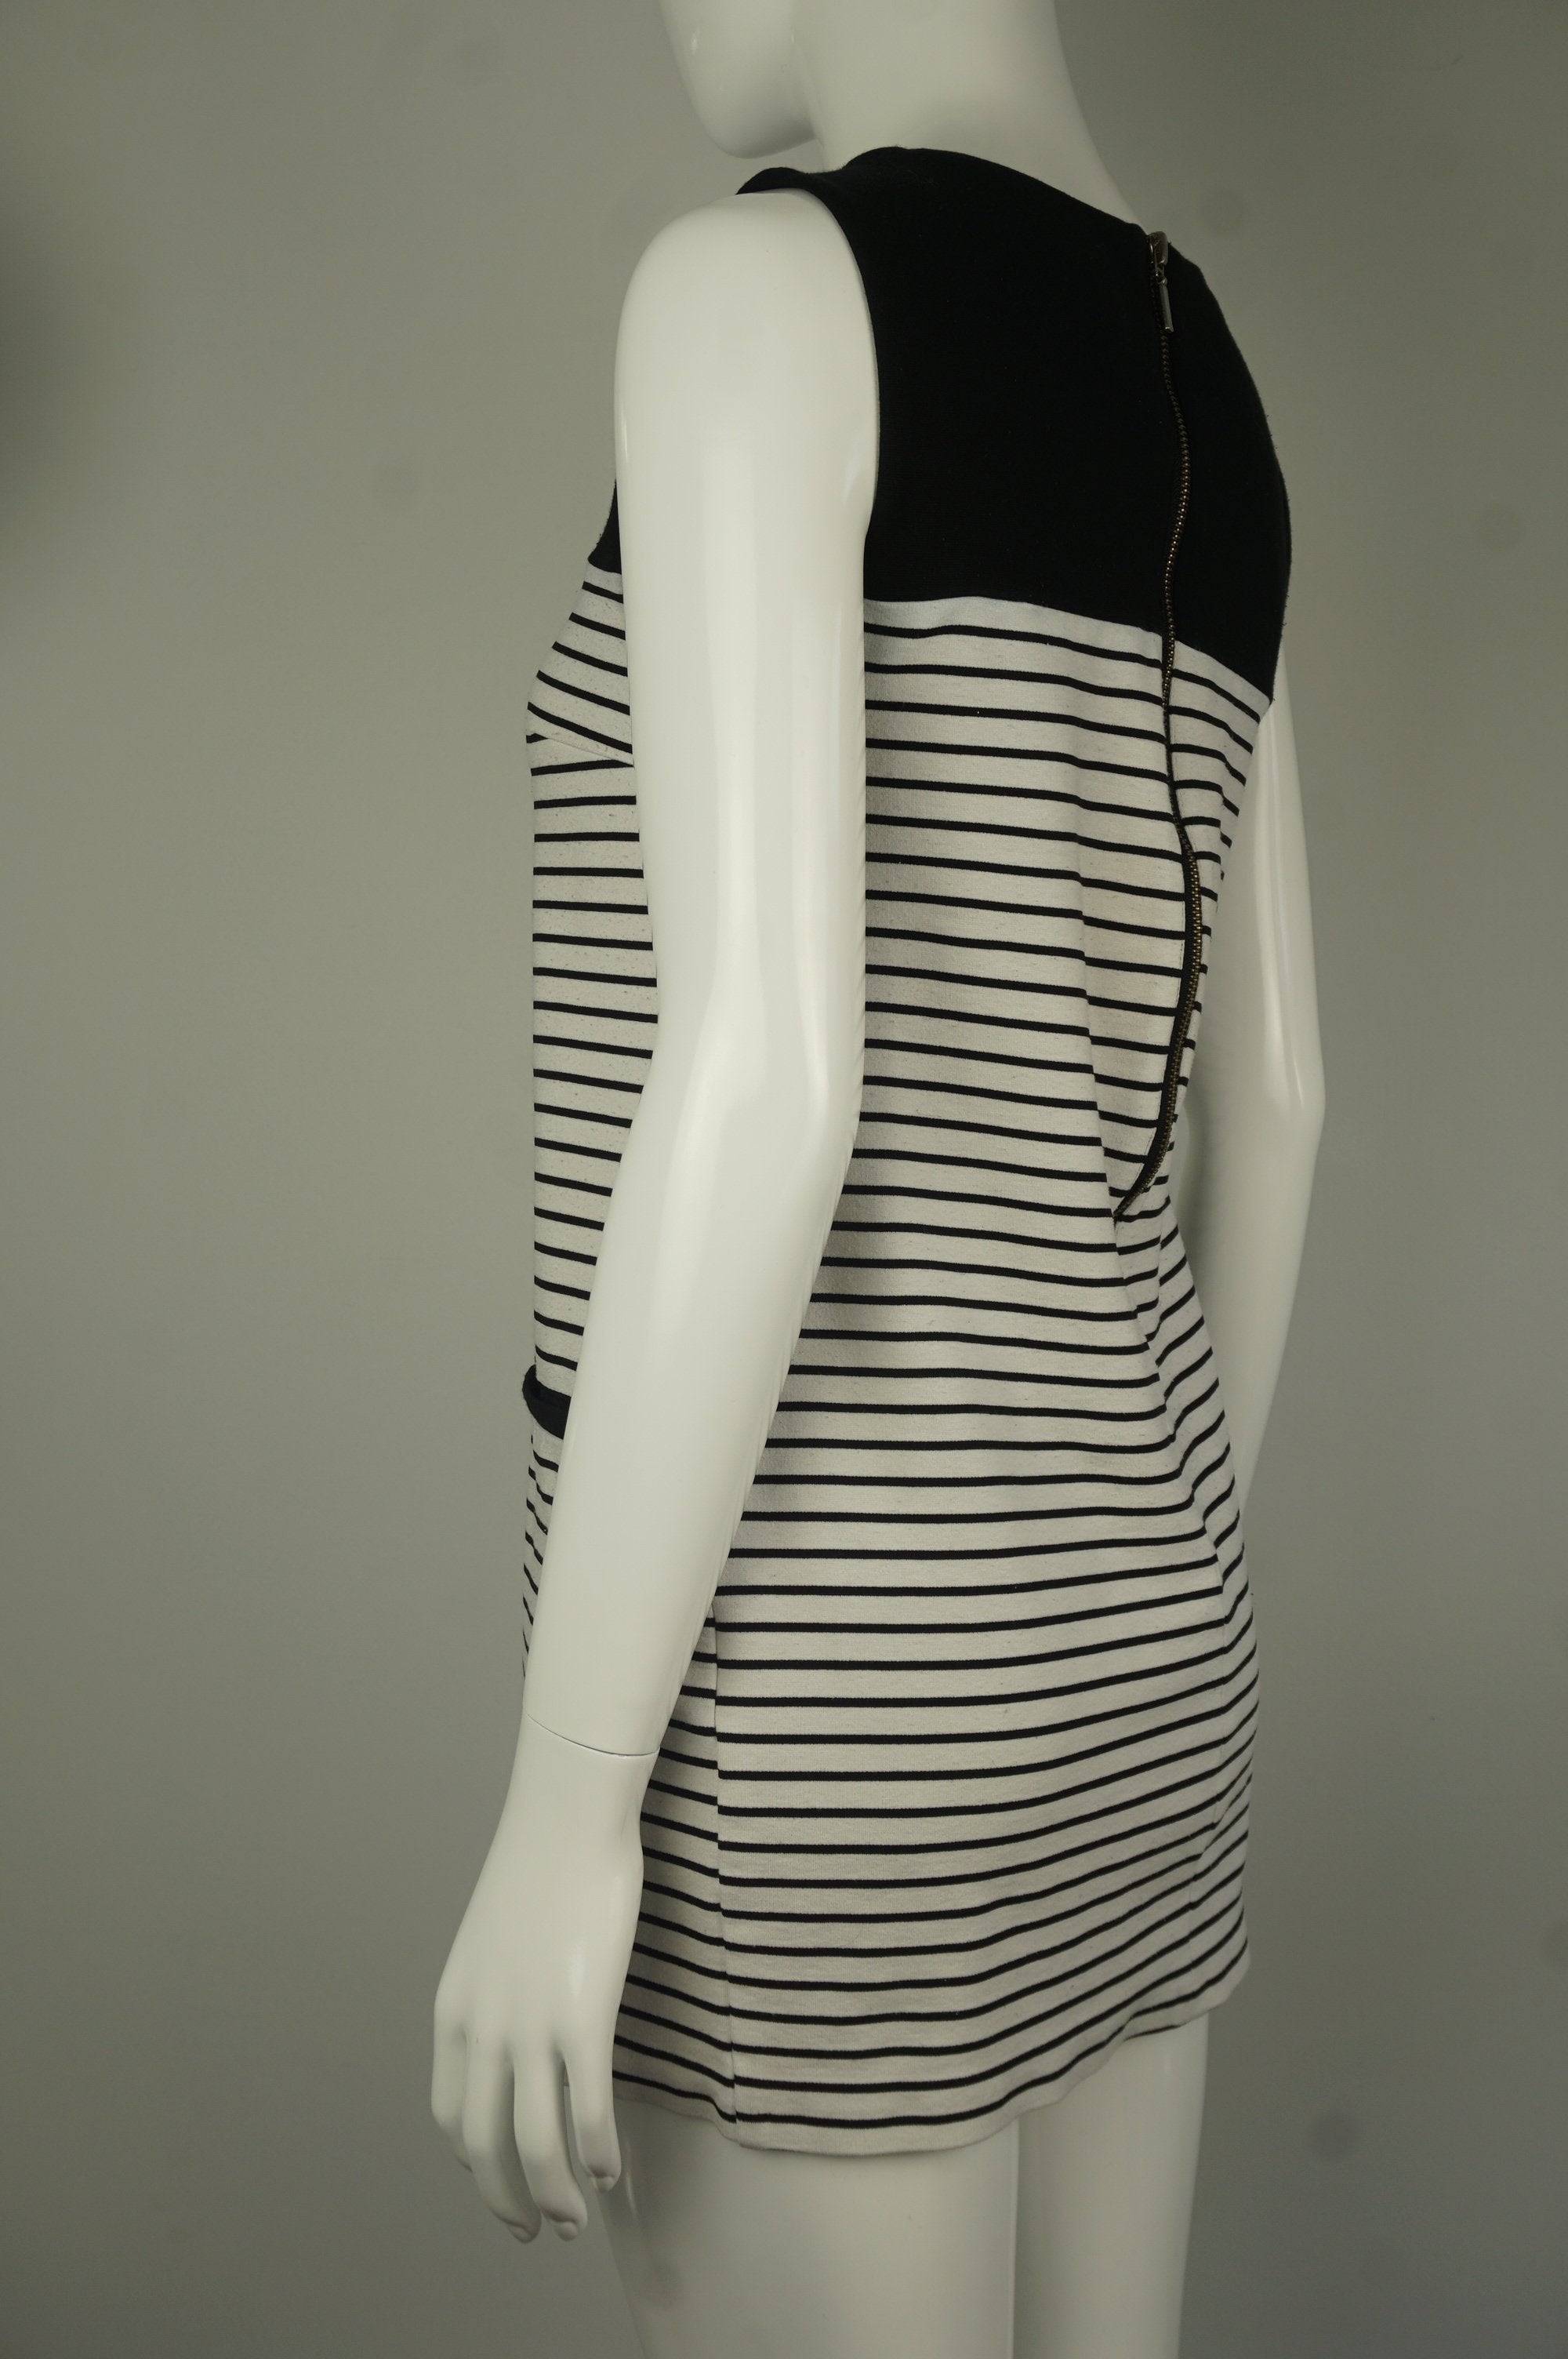 Love 21 Mini Straight Dress with Solid Black Top and Striped B&W bottom, Cute and comfy, this unique Black and White Striped Mini-Dress with Long Zipper in the back is perfect for outing  events and casual hangouts.  , Black, White, Cotton Fabric, women's Dresses & Skirts, women's Black, White Dresses & Skirts, Love 21 women's Dresses & Skirts, Simple Casual Black and White Women's Dress, Straight Cut Comfy Women's Dress, Women's Baseball Dress